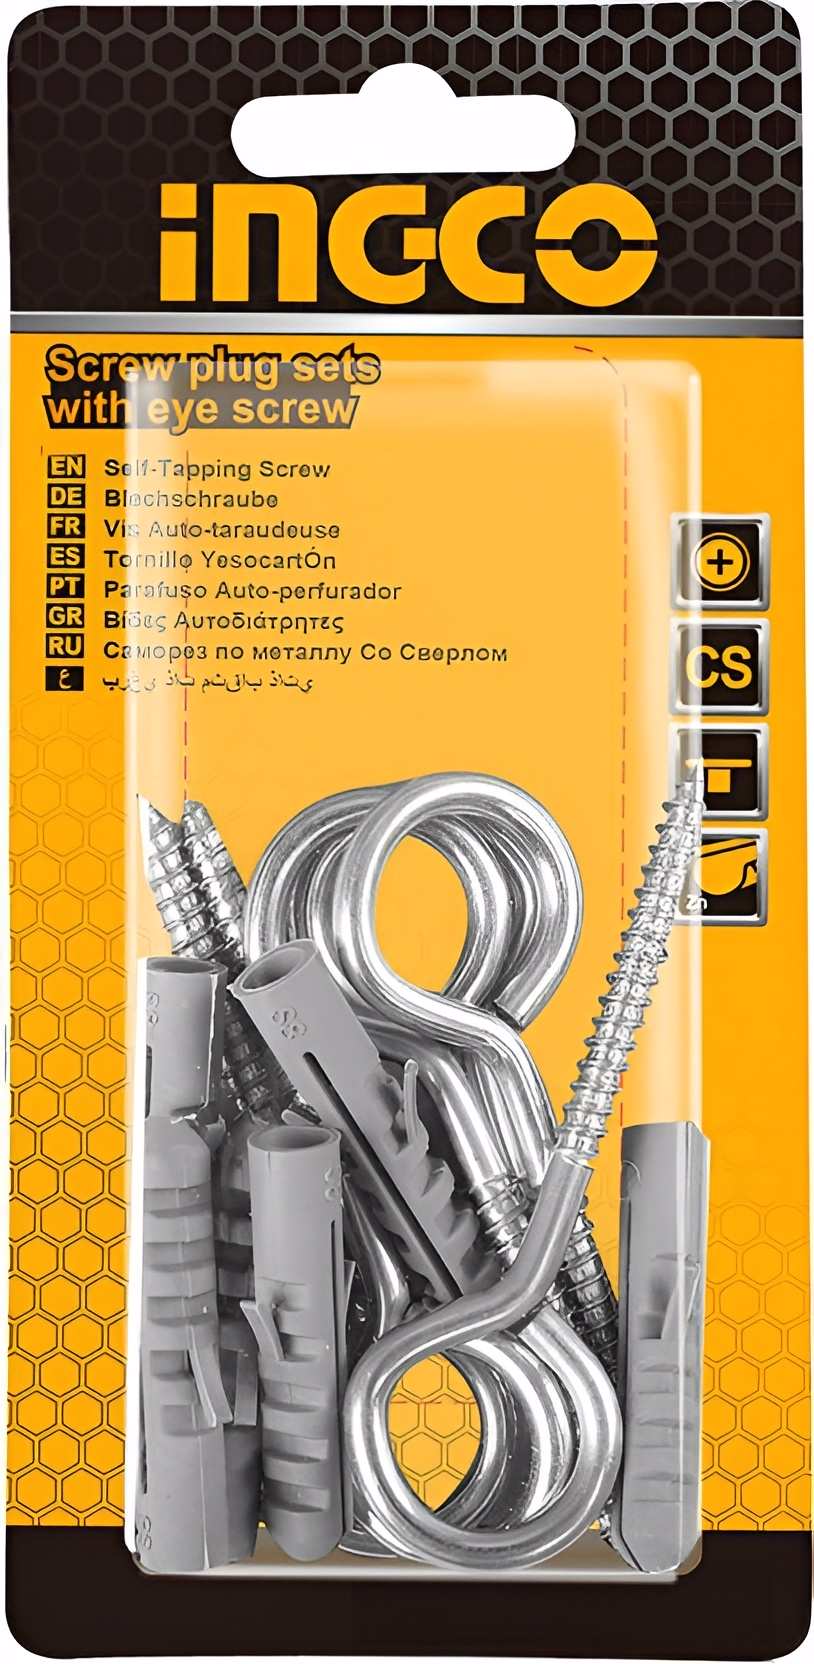 Ingco 6 Pieces Screw Plug Sets With Eye Screw HWSPK5022 | Supply Master Accra, Ghana Fasteners Buy Tools hardware Building materials